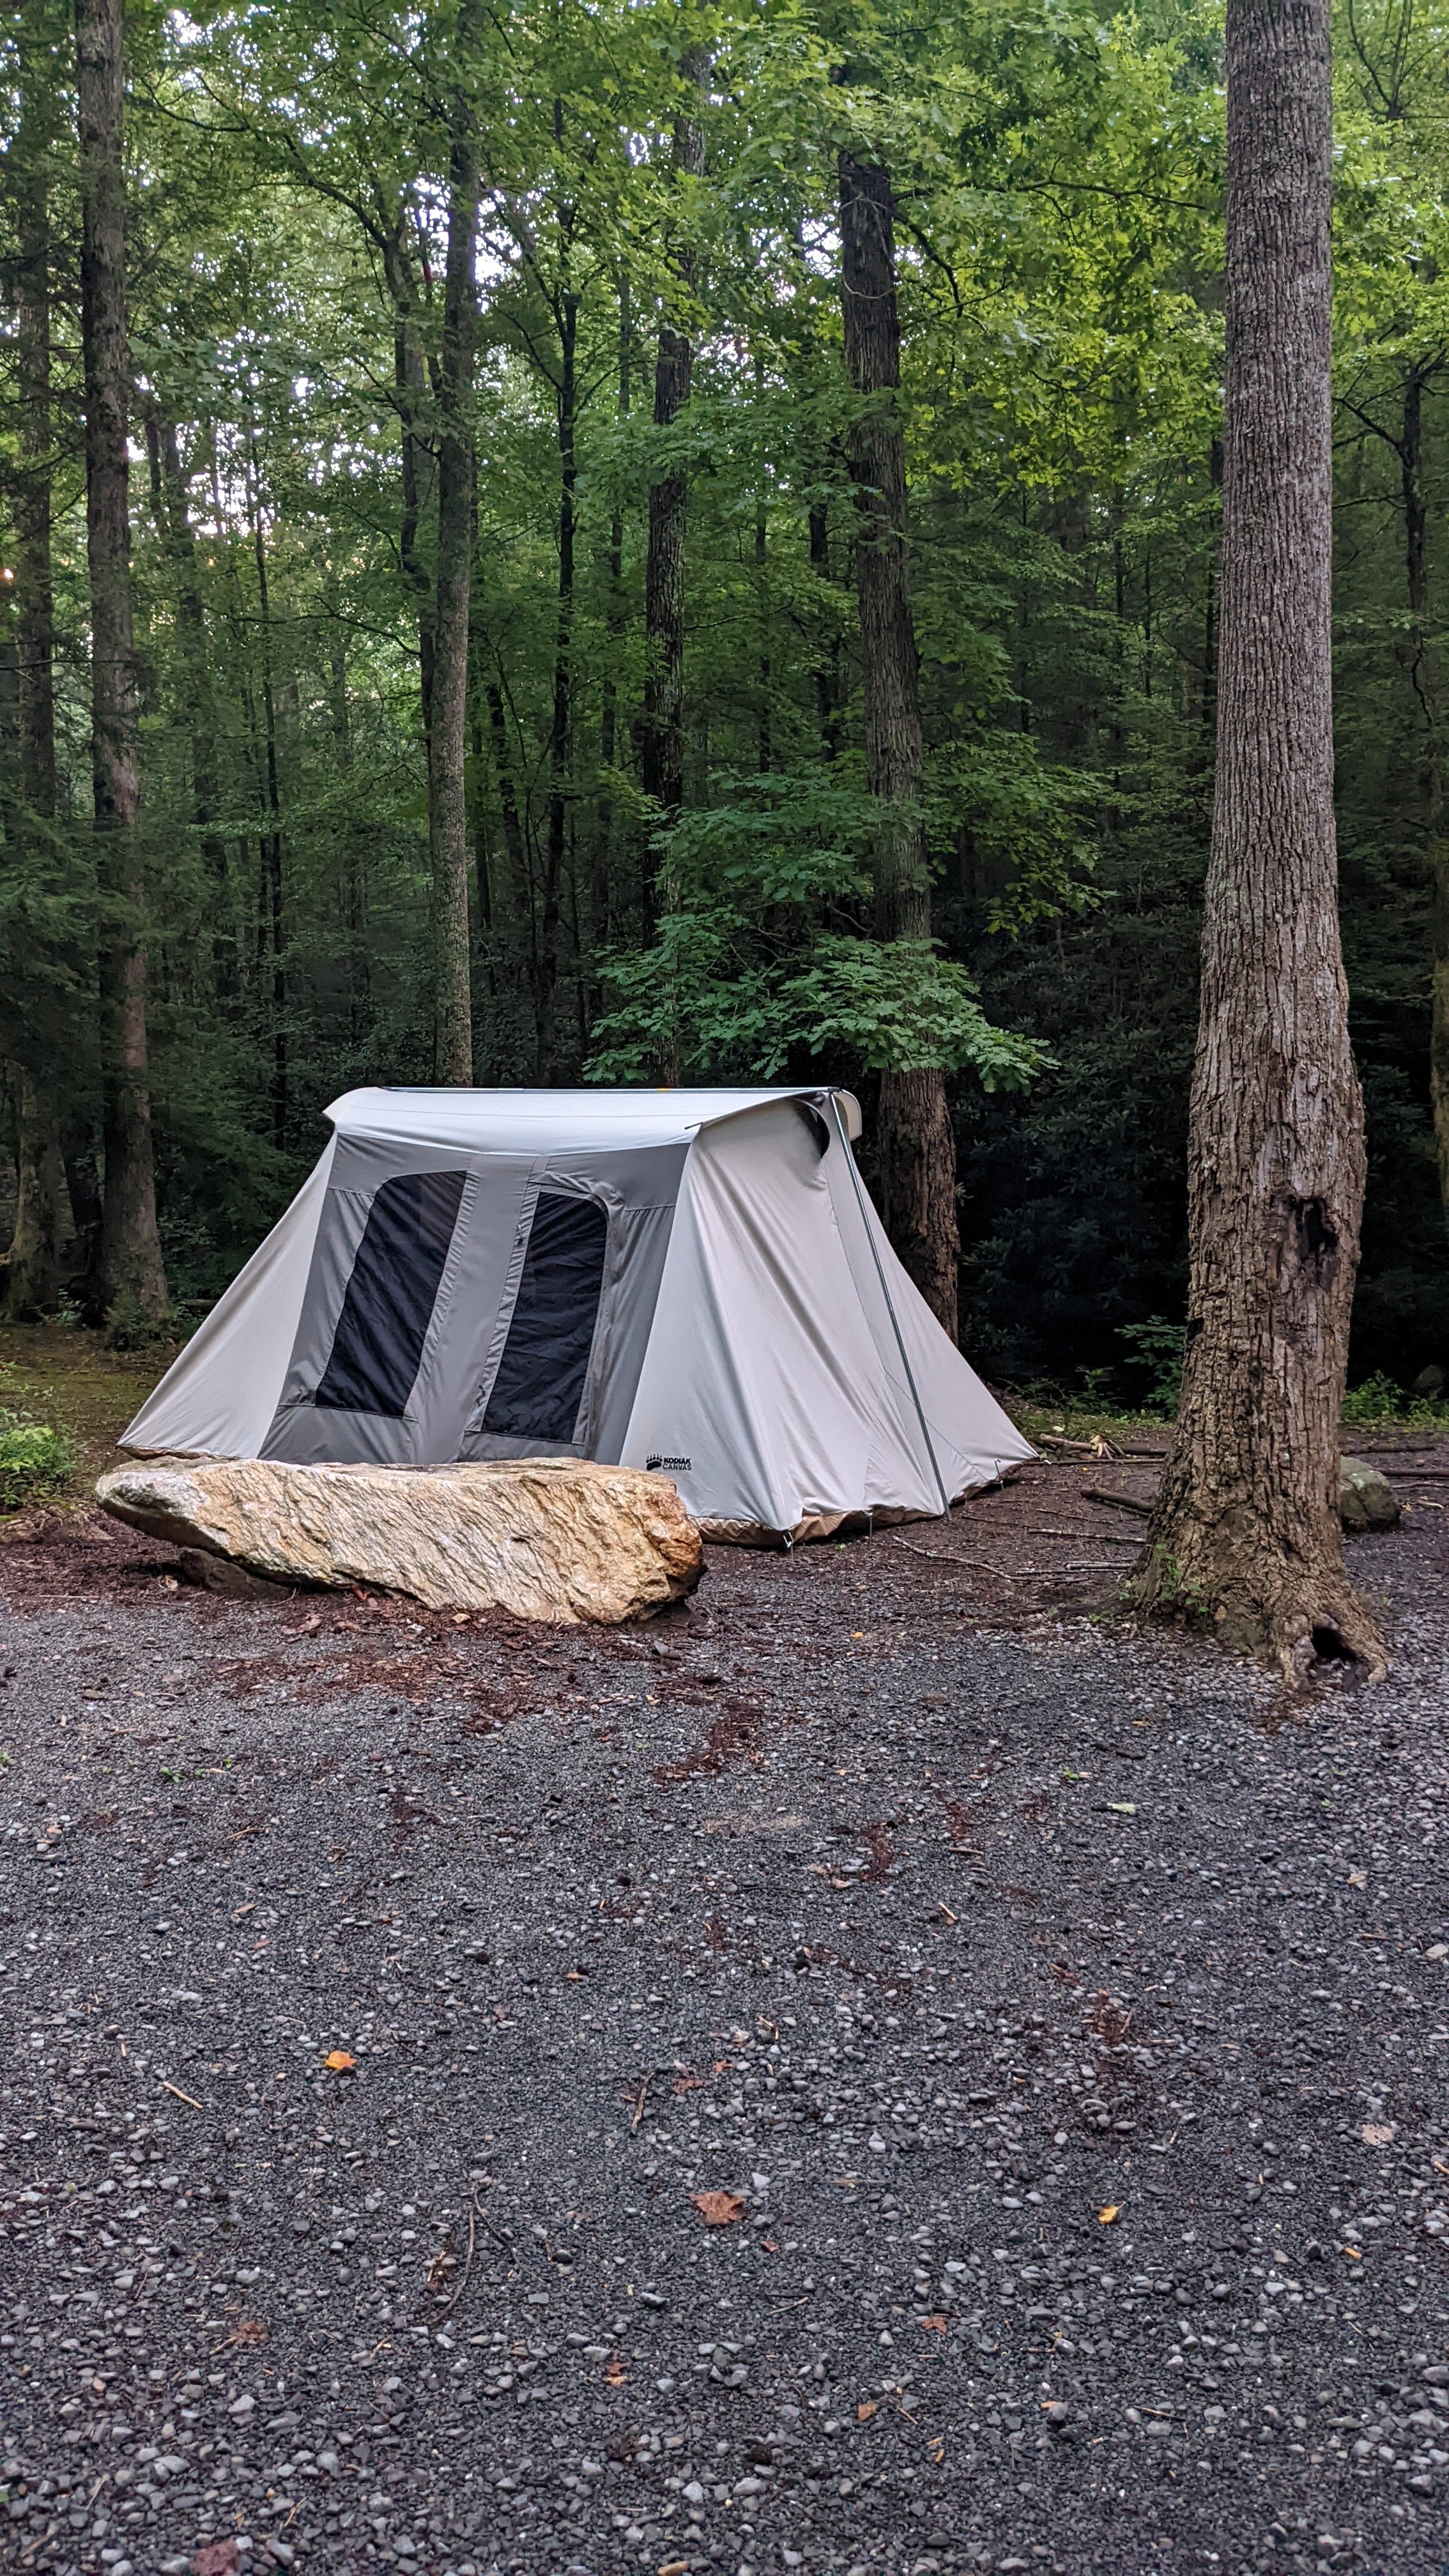 Camper submitted image from Hickey Gap (Cohutta WMA) - 5